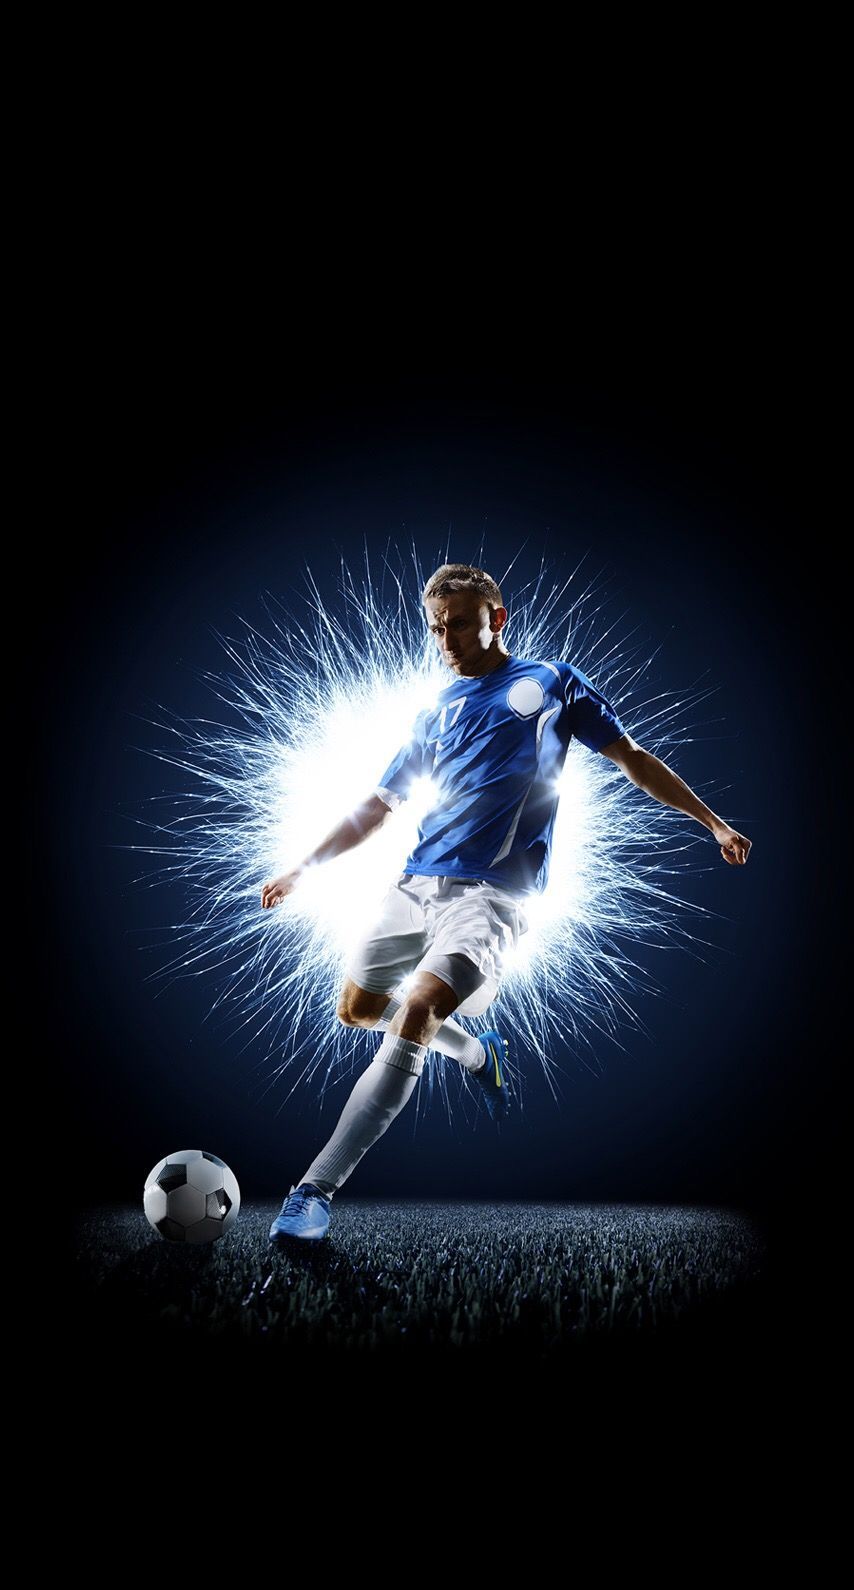 HD football wallpaper for iphone android free. Football background, Football wallpaper, Soccer drawing